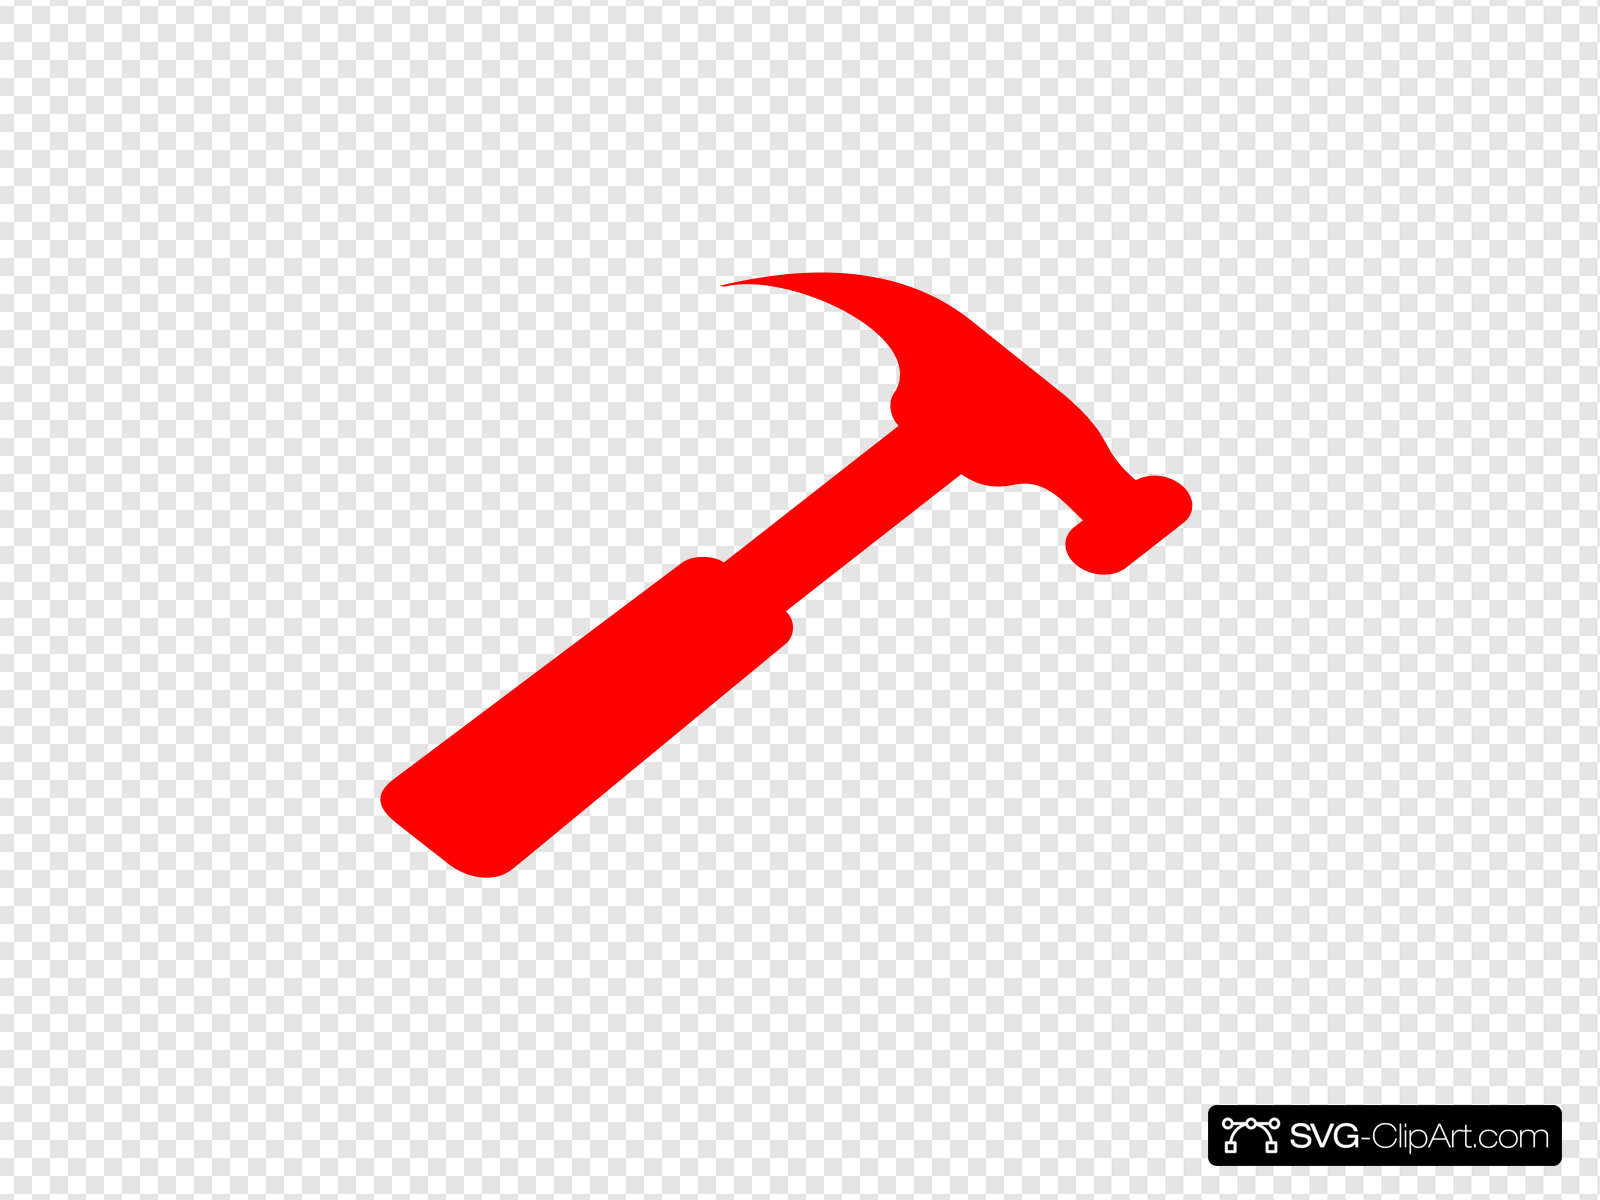 Clipart hammer svg. Red clip art icon